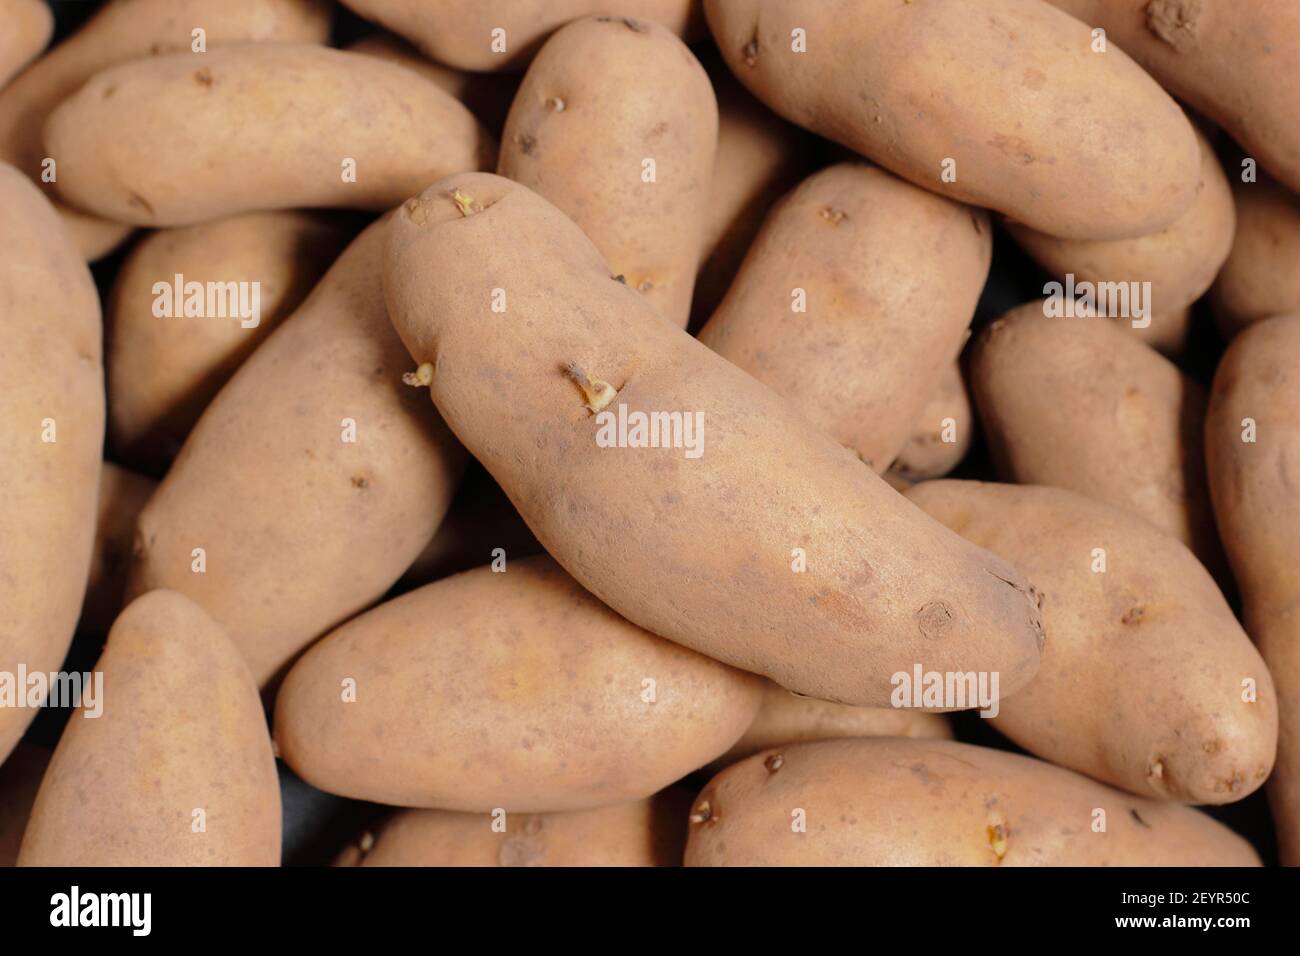 Seed potatoes ready for chitting ahead of the growing season. Pictured: Solanum tuberosum 'Ratte' seed potatoes. UK Stock Photo